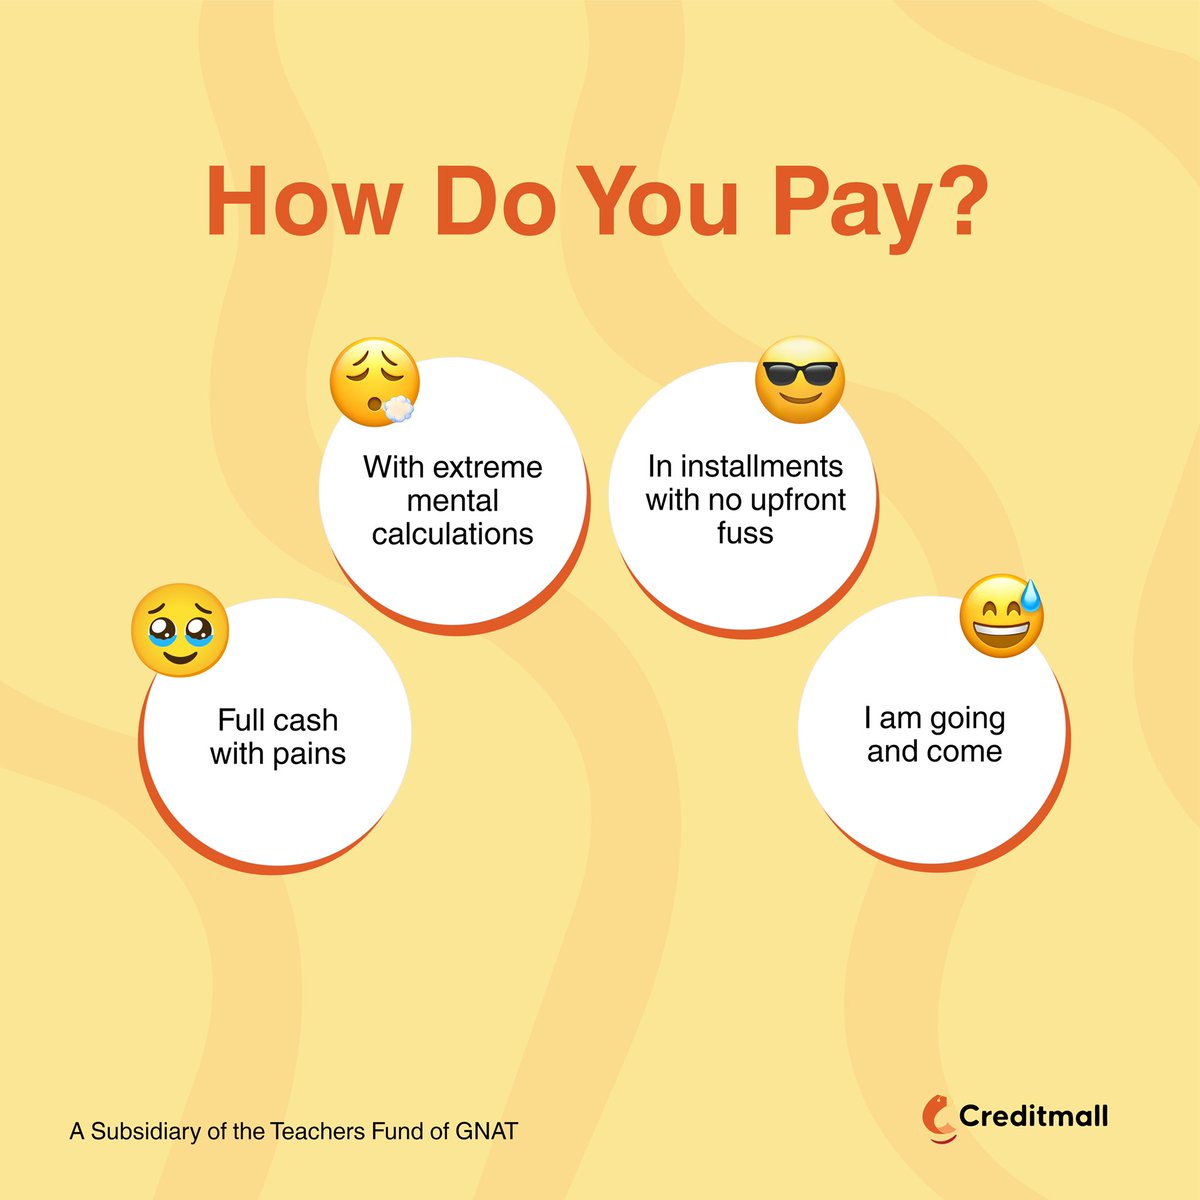 Stick to the 😎 way to pay and live comfortable!

Call us now on 0308250088 to learn more! 

#creditmalllimited #buynowpaylater #getmooorewithcreditmall #shopeasy #splitpayments #getmooorewithcreditmall #lifecomfortable #teachersfund #financialservices #ghana